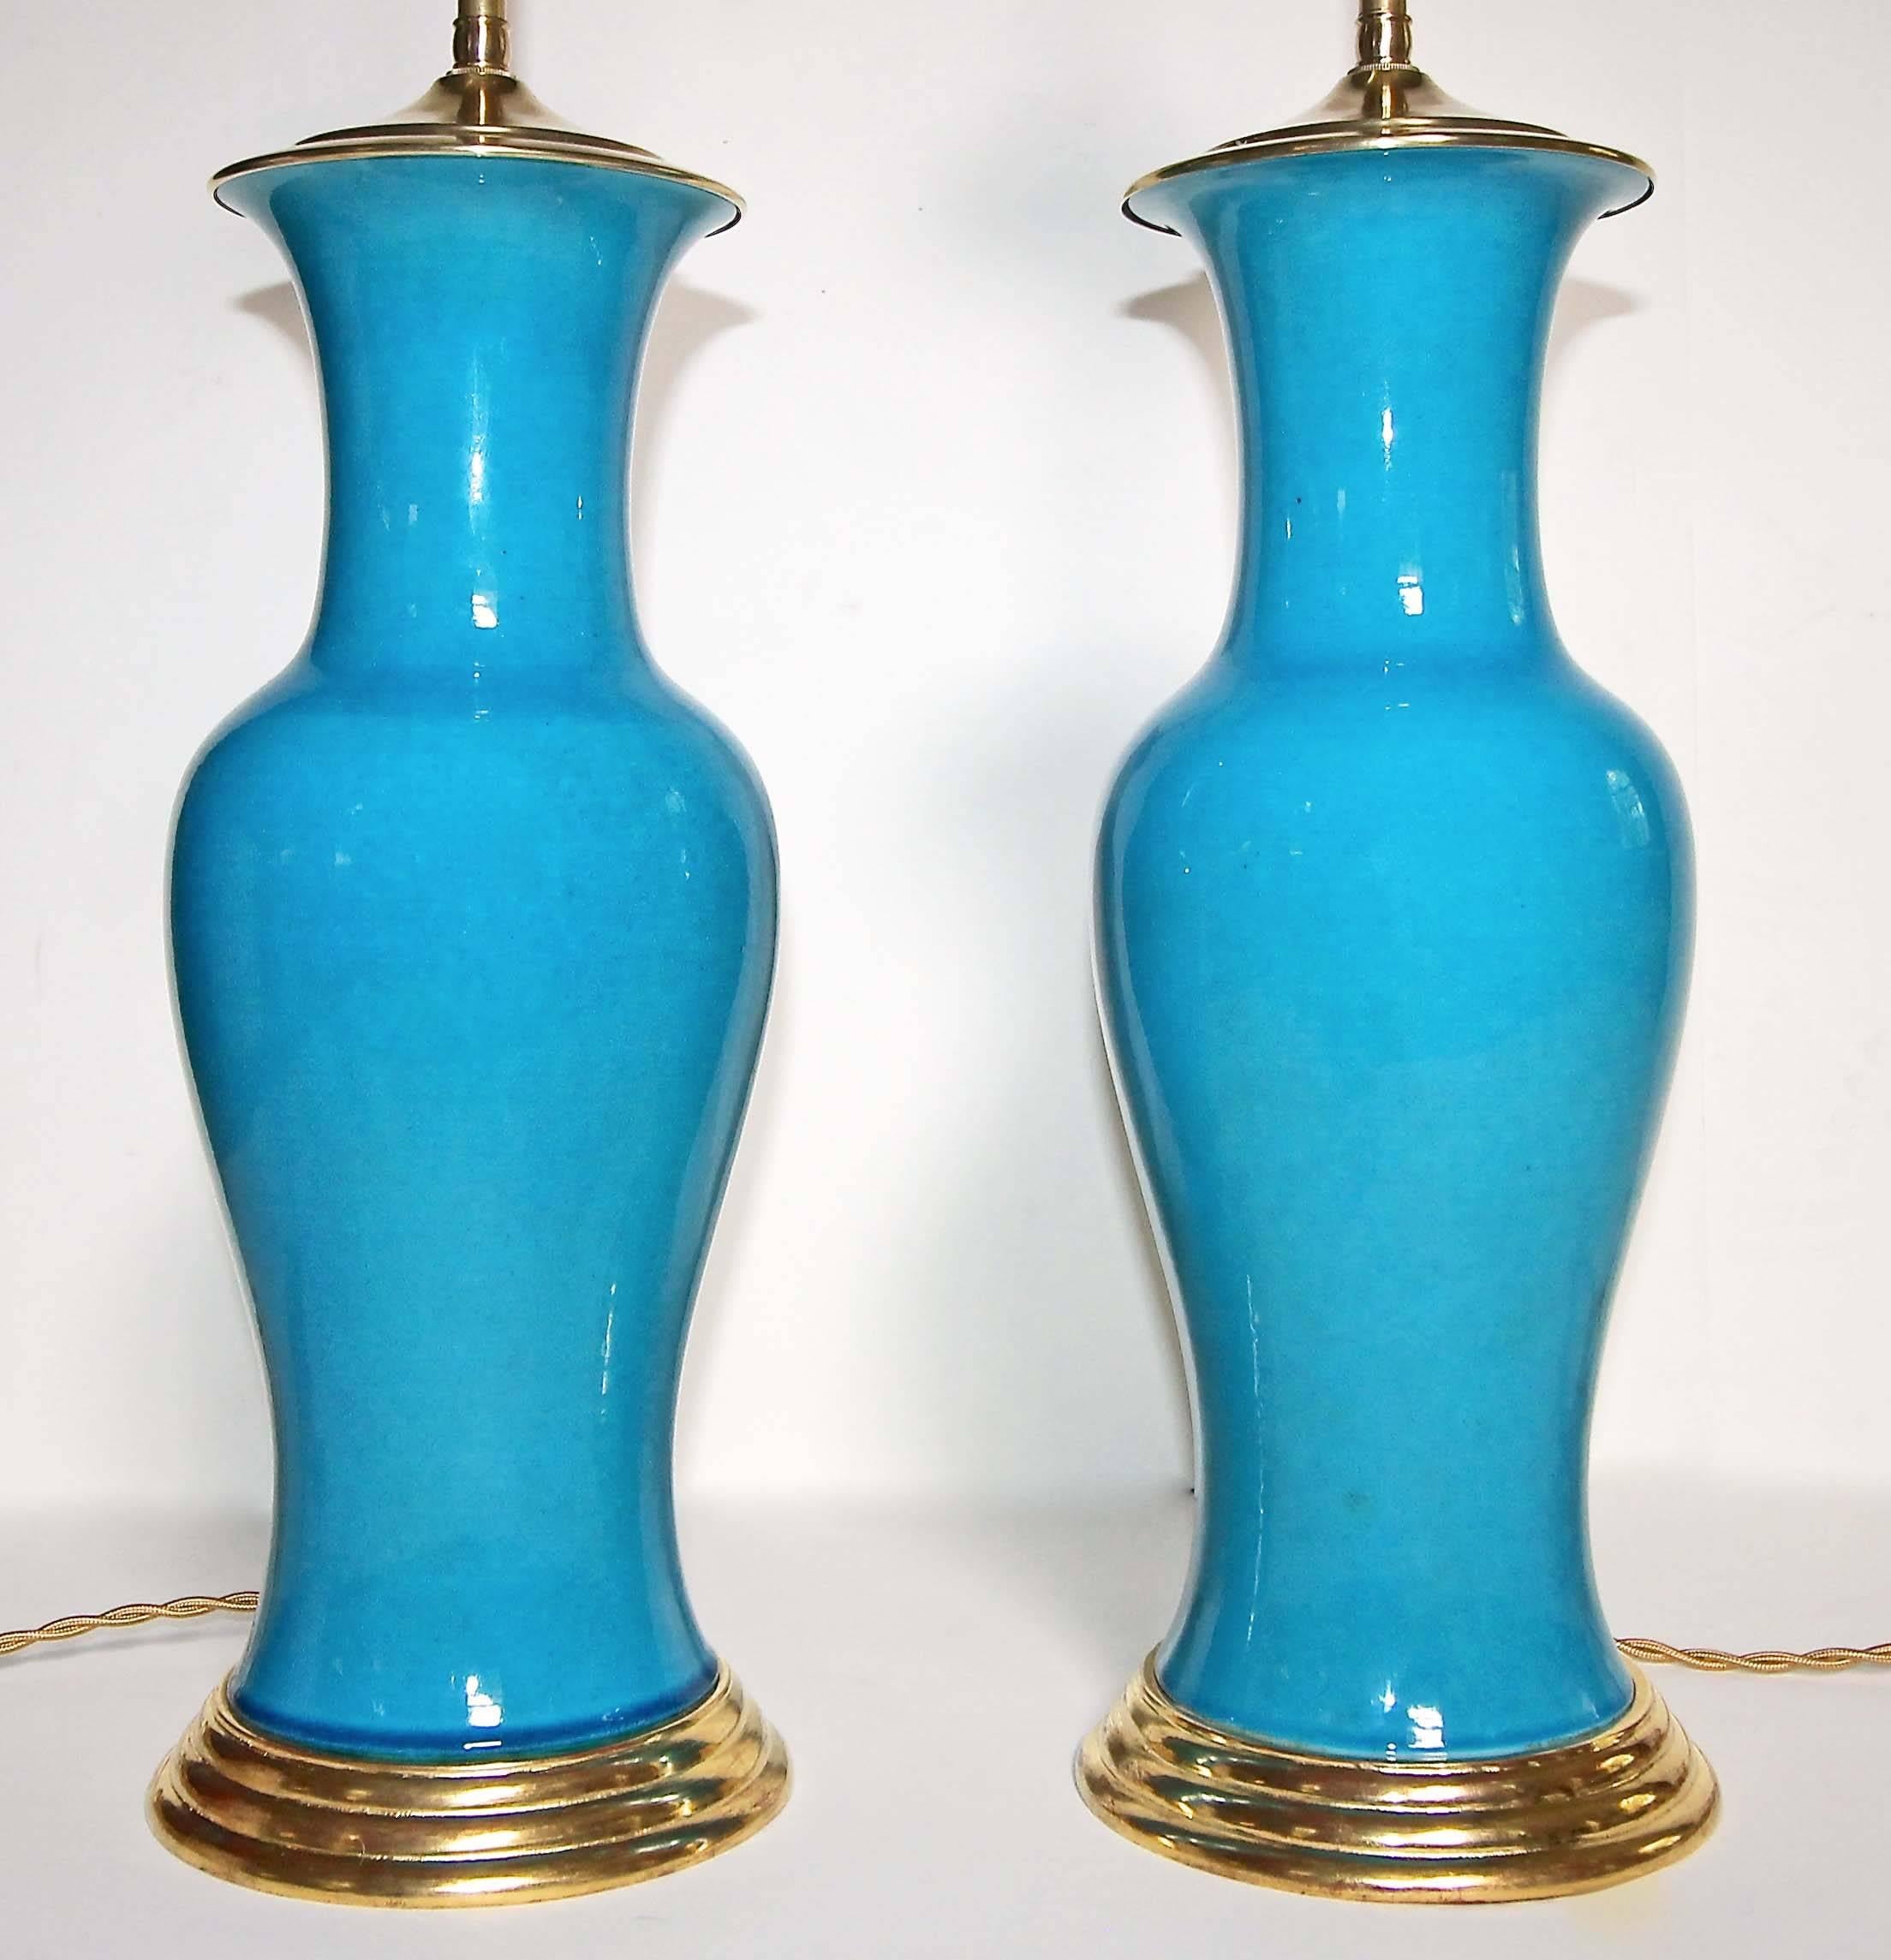 Japanese Pair of Turquoise Blue Ceramic Lamps with Water Gilt Wood Bases